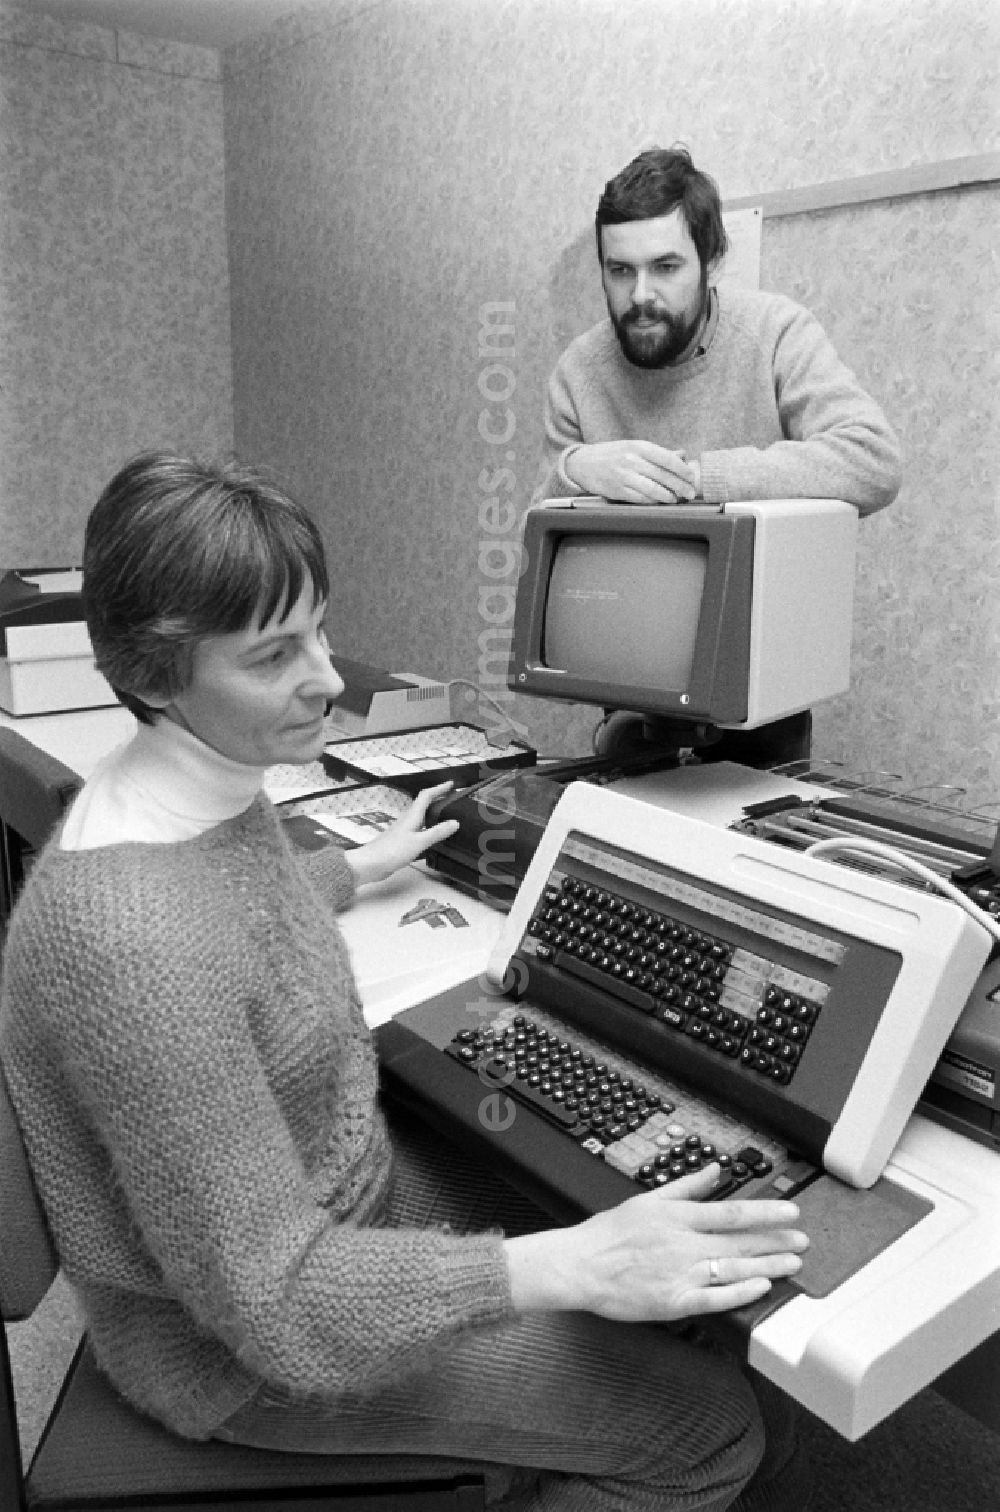 GDR photo archive: Berlin - Employee at the project planning in the VEB Baukombinat Koepenick in the district Treptow-Koepenick in Berlin, the former capital of the GDR, German Democratic Republic. Woman sits in front of a Robotron computer and man stands behind a screen / monitor